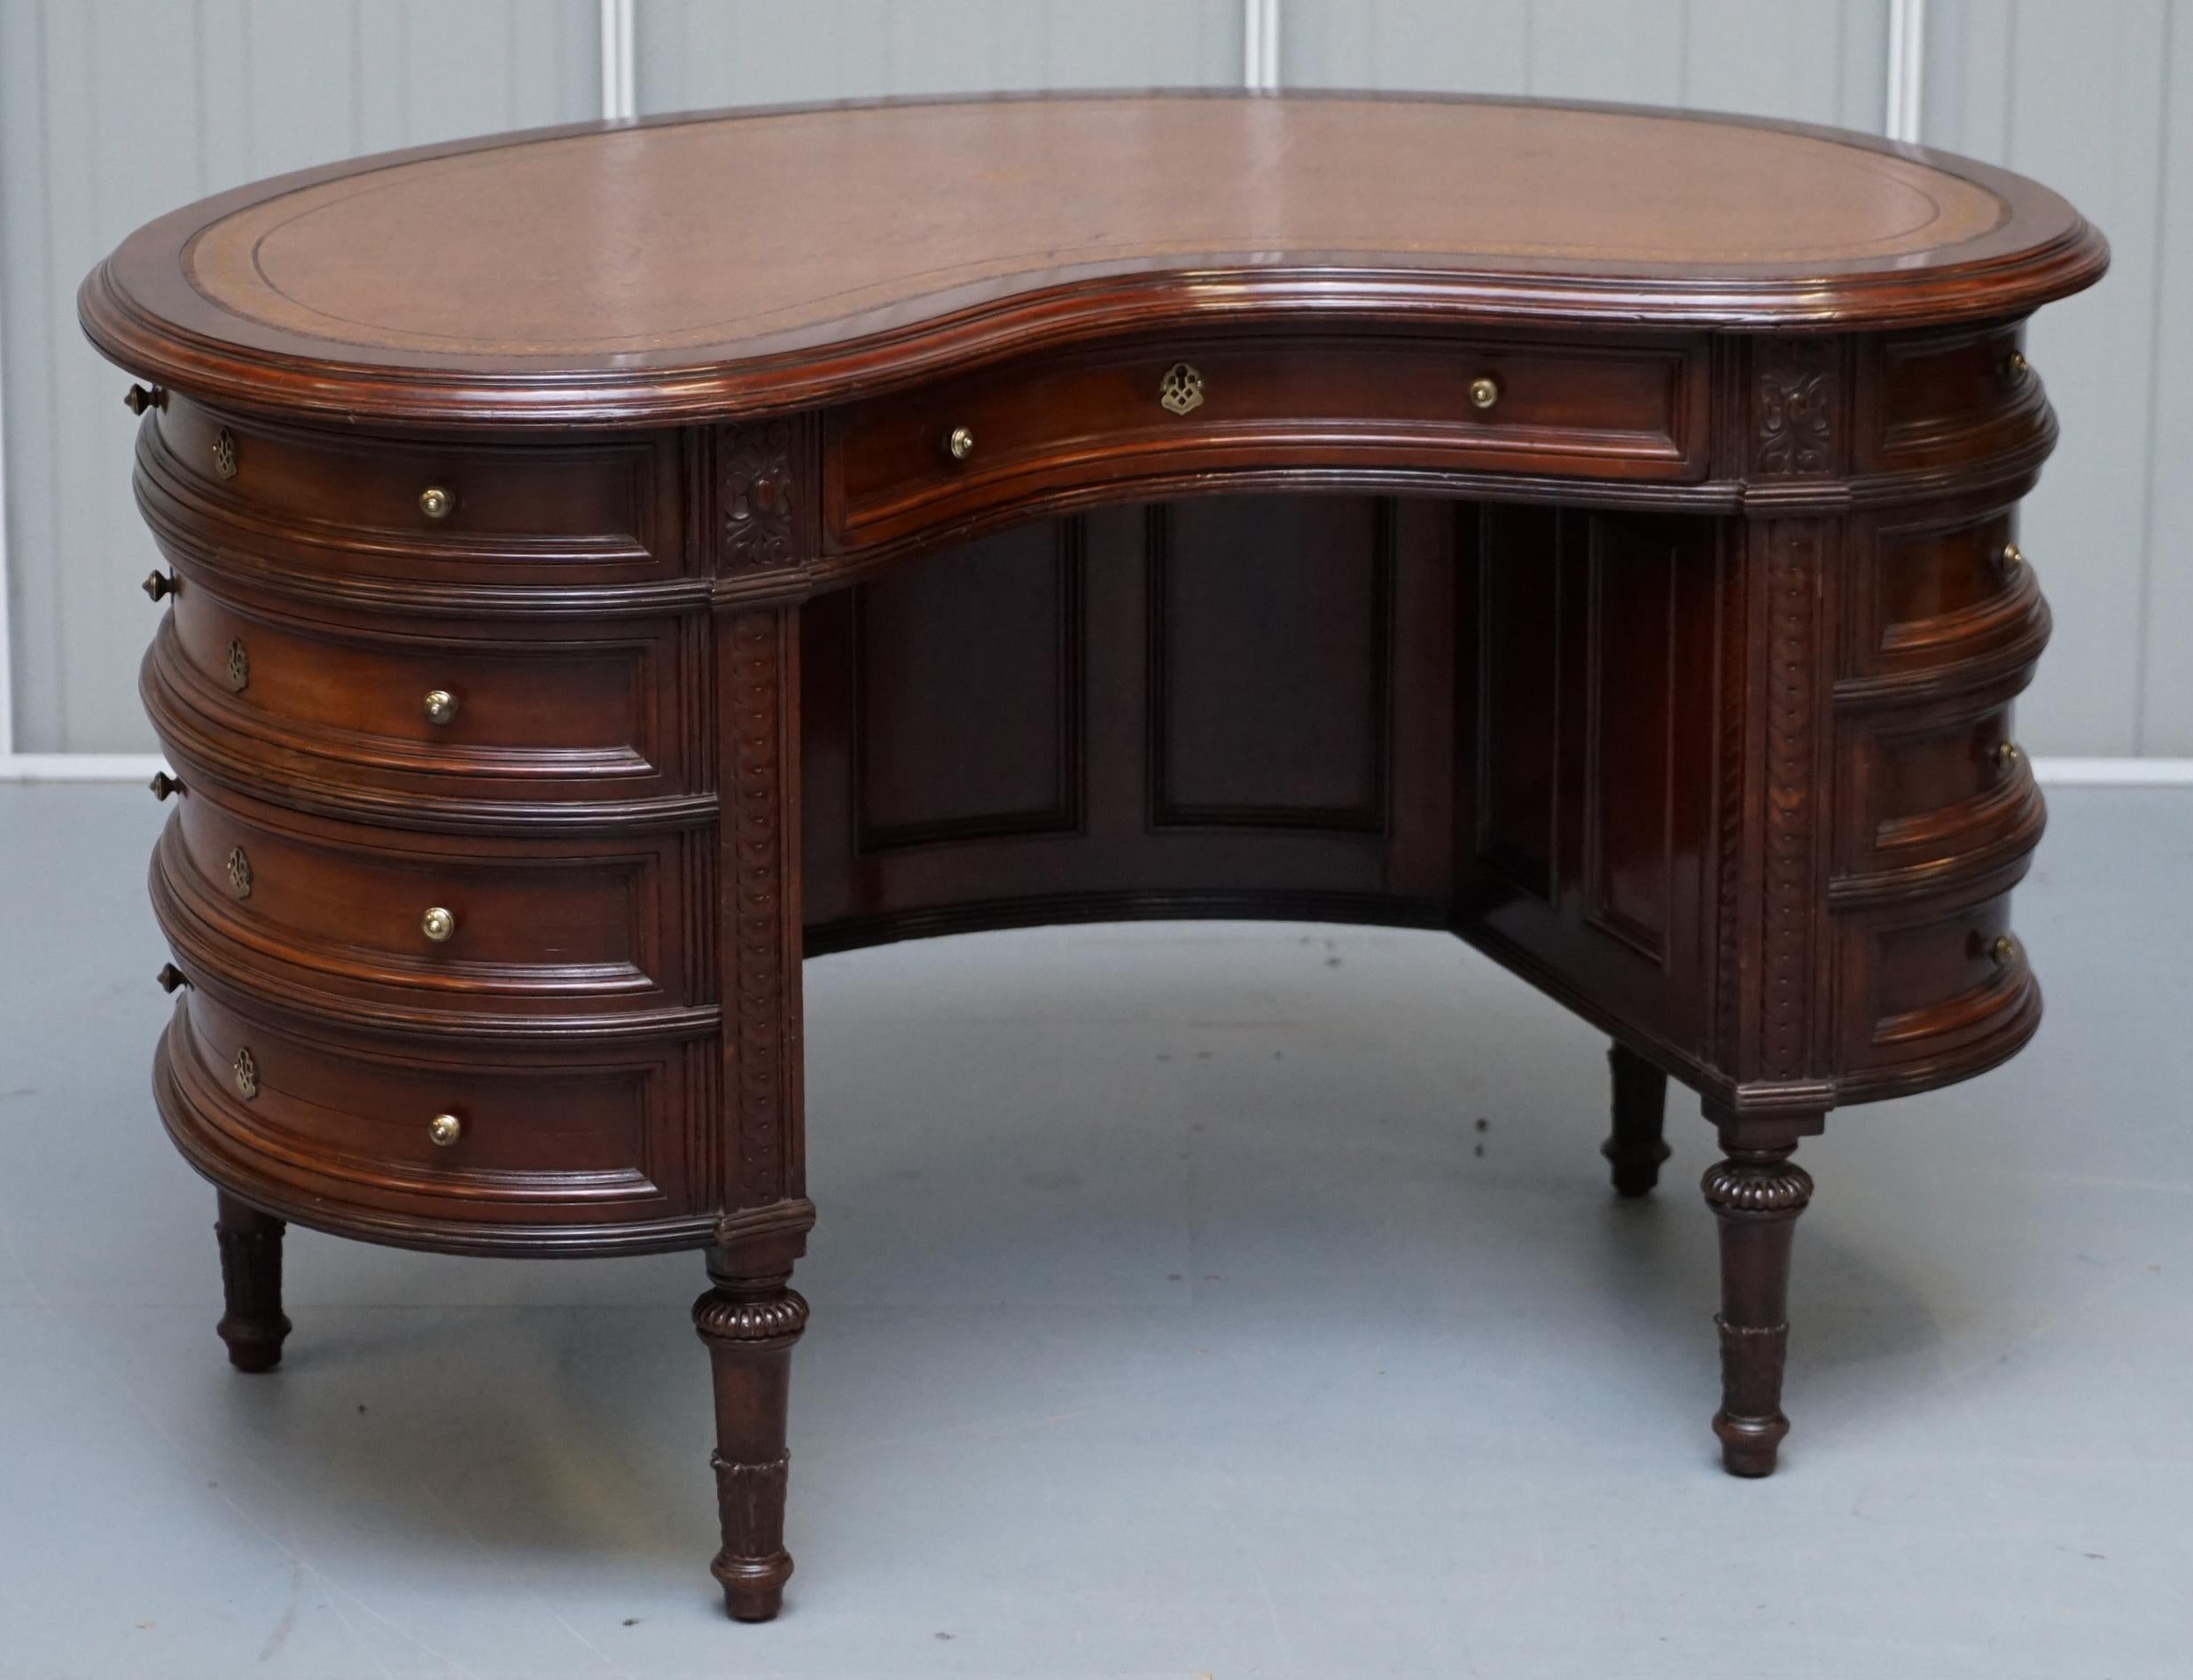 We are delighted to offer for sale this stunning exceptionally rare Victorian Mahogany Chippendale revival kidney desk with bookcase back

A very rare find, I’ve only ever seen Gillow’s of Lancaster making bookcase back desks of this quality, when